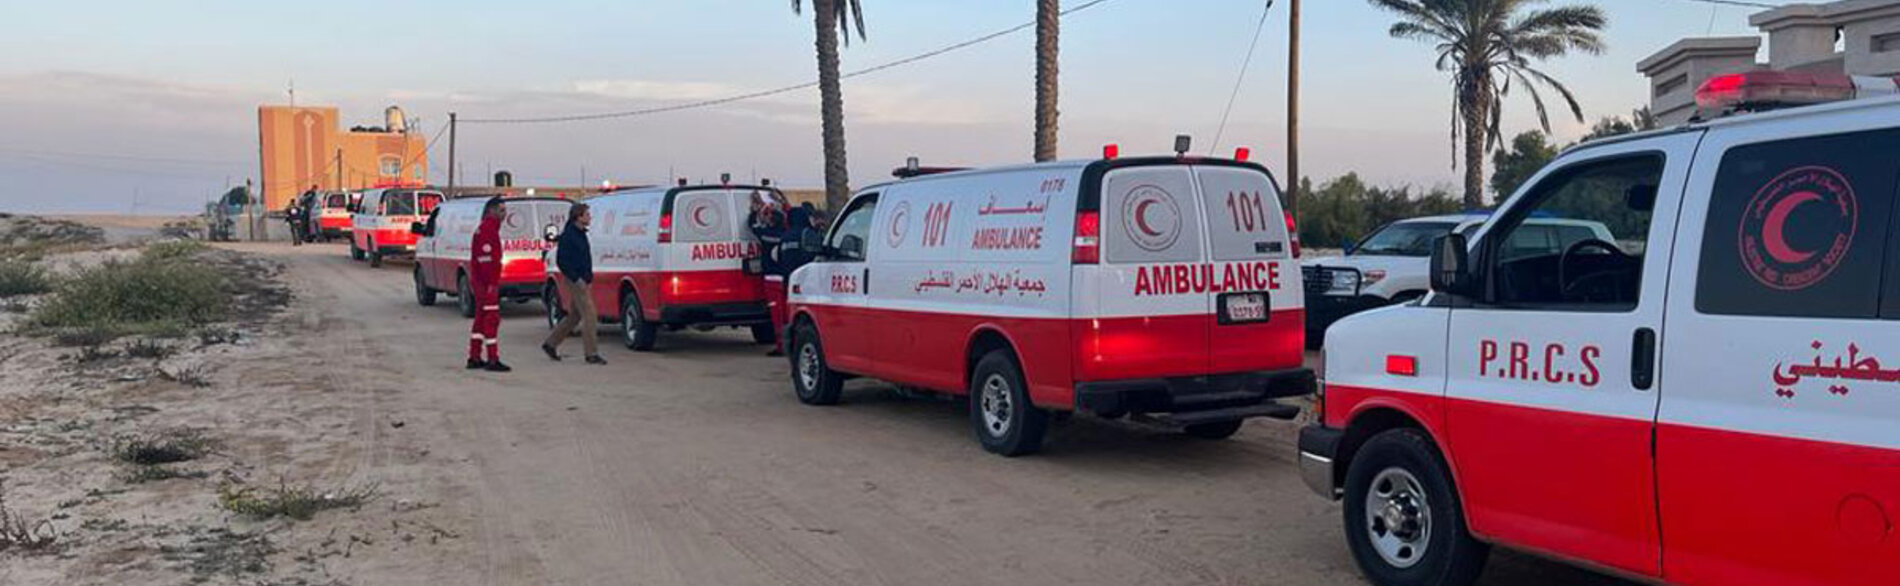 On 22 November, 190 wounded and sick people, their companions, and medical teams from Shifa Hospital were evacuated to southern Gaza. The convoy was subjected to hours-long inspection process on the way, jeopardizing the health of the patients. Photo: A previous medical evacuation convoy on 19 November. Photo by WHO 